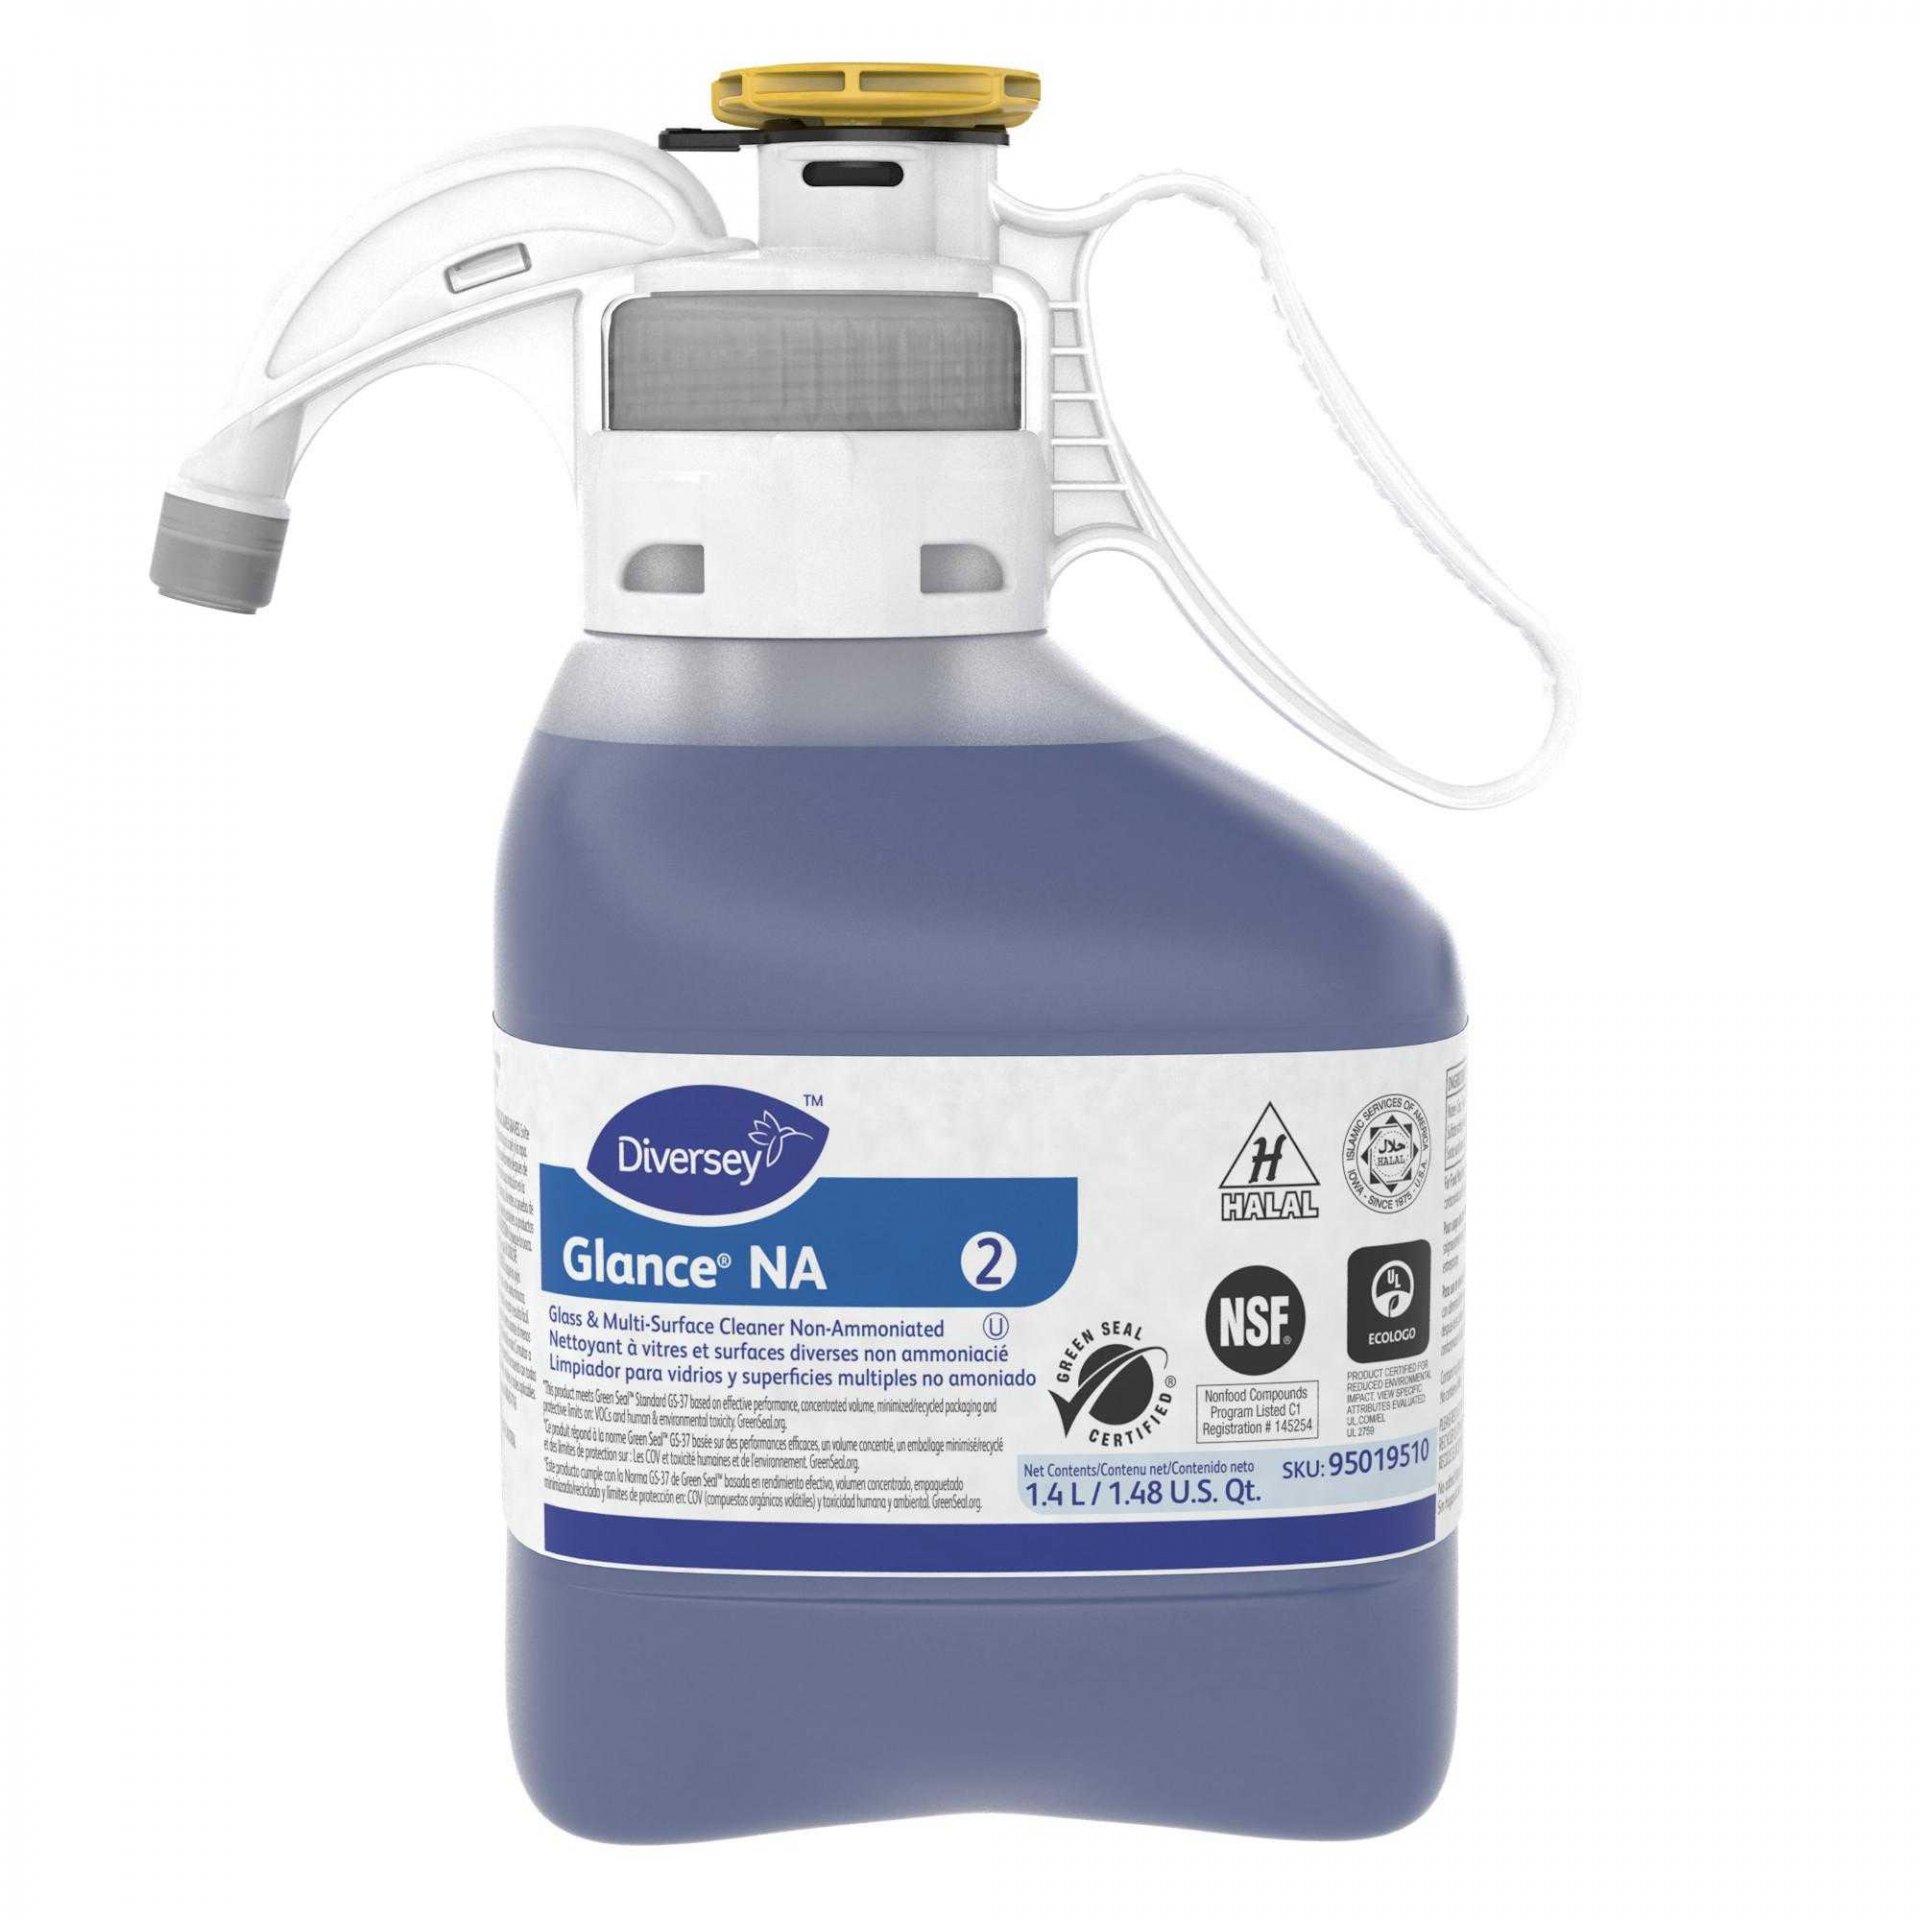 95019510 GLANCE NA GLASS & MP CLEANER NON-AM